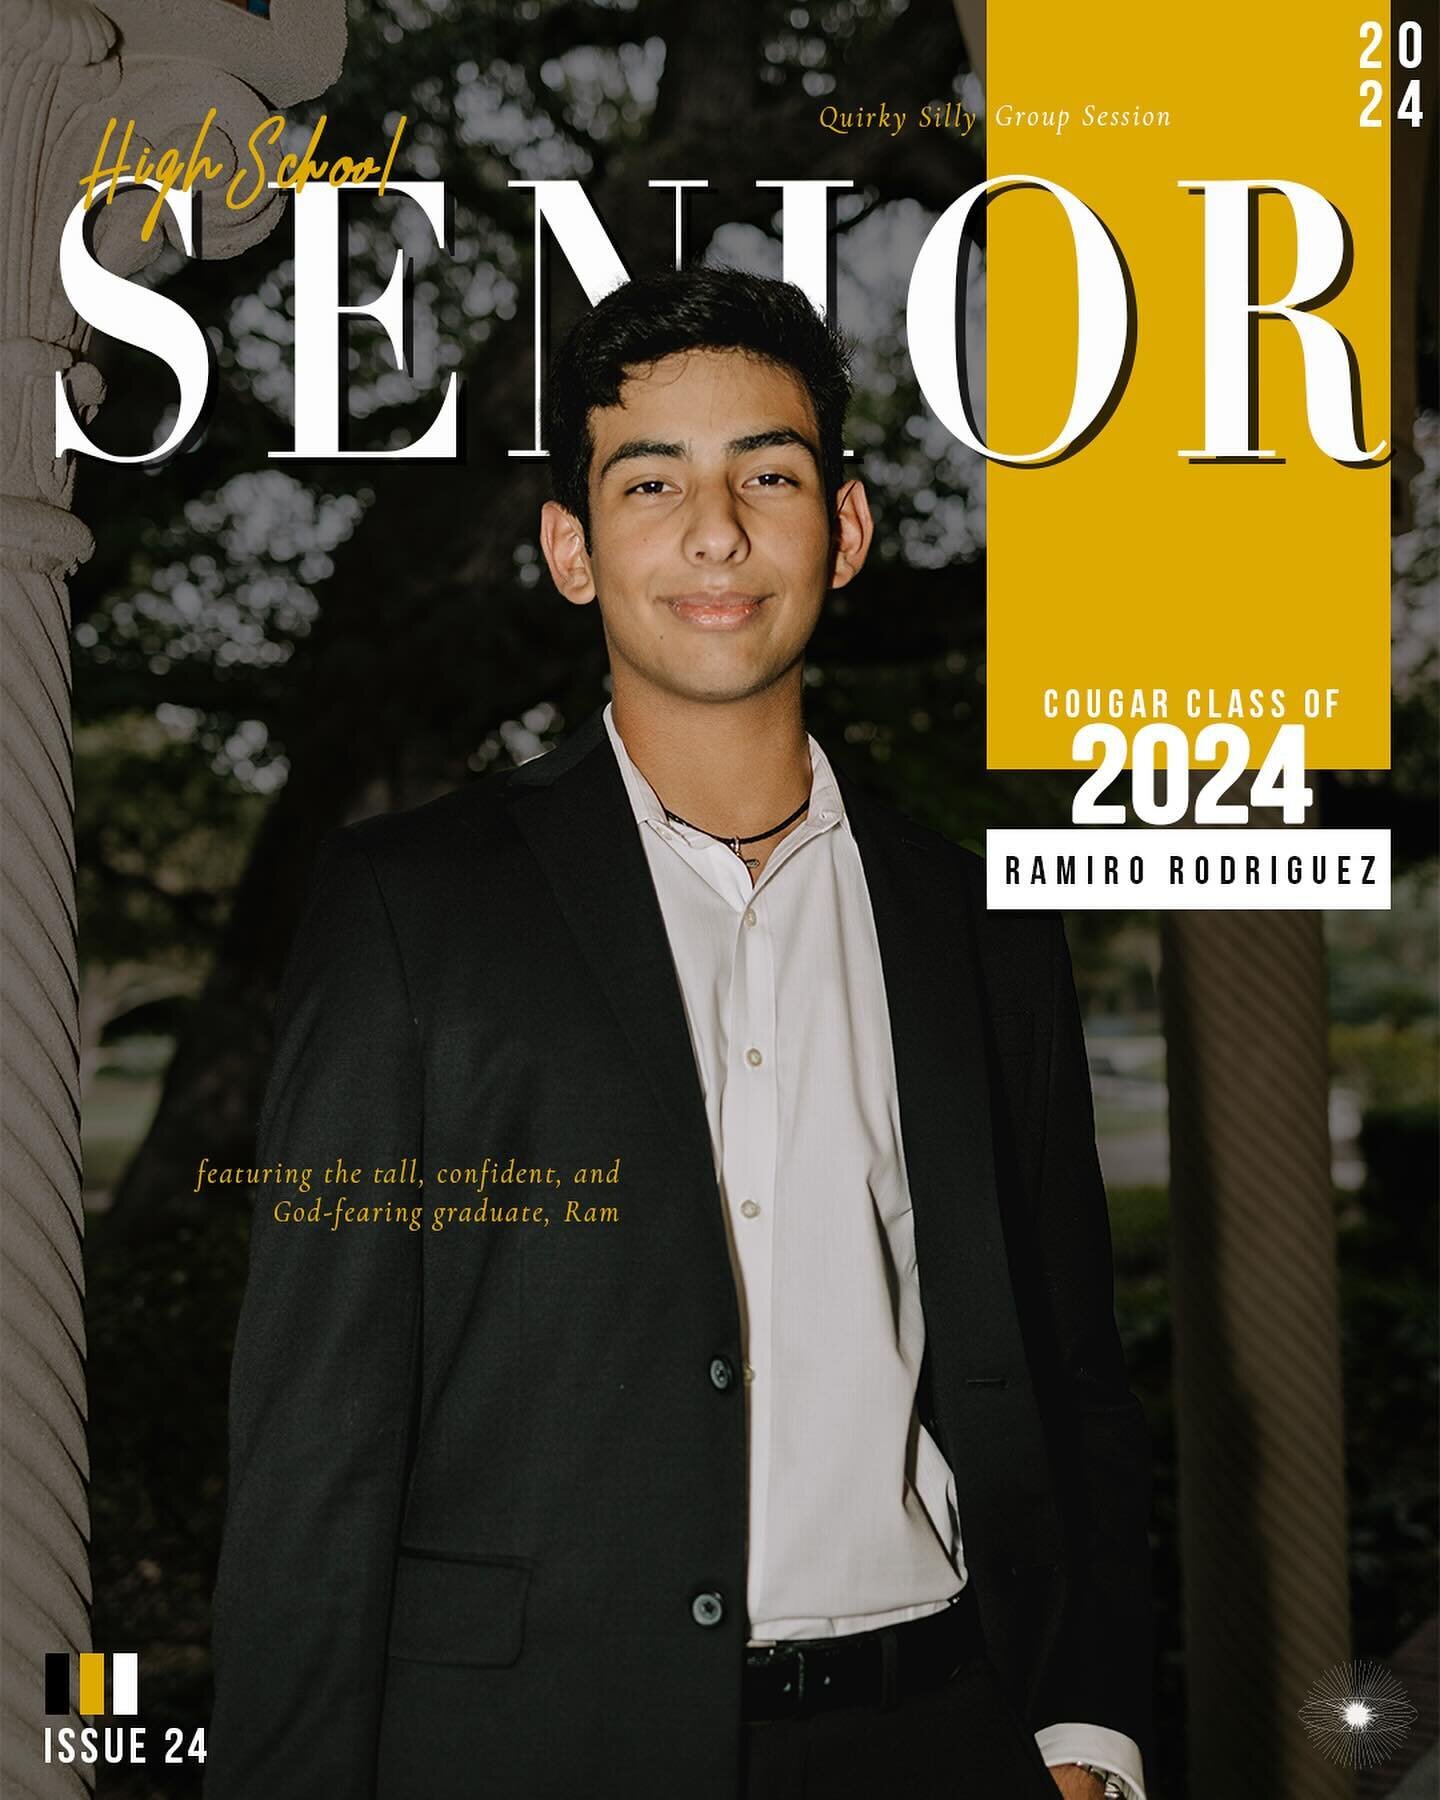 Ramiro Rodriguez, Clark Cougar class of 2024! You&rsquo;ll see more of this group 🗣️

My first 2024 senior high school cover - my best friend&rsquo;s Life Teen kids loved the images I created for their week at camp and decided they wanted to style t